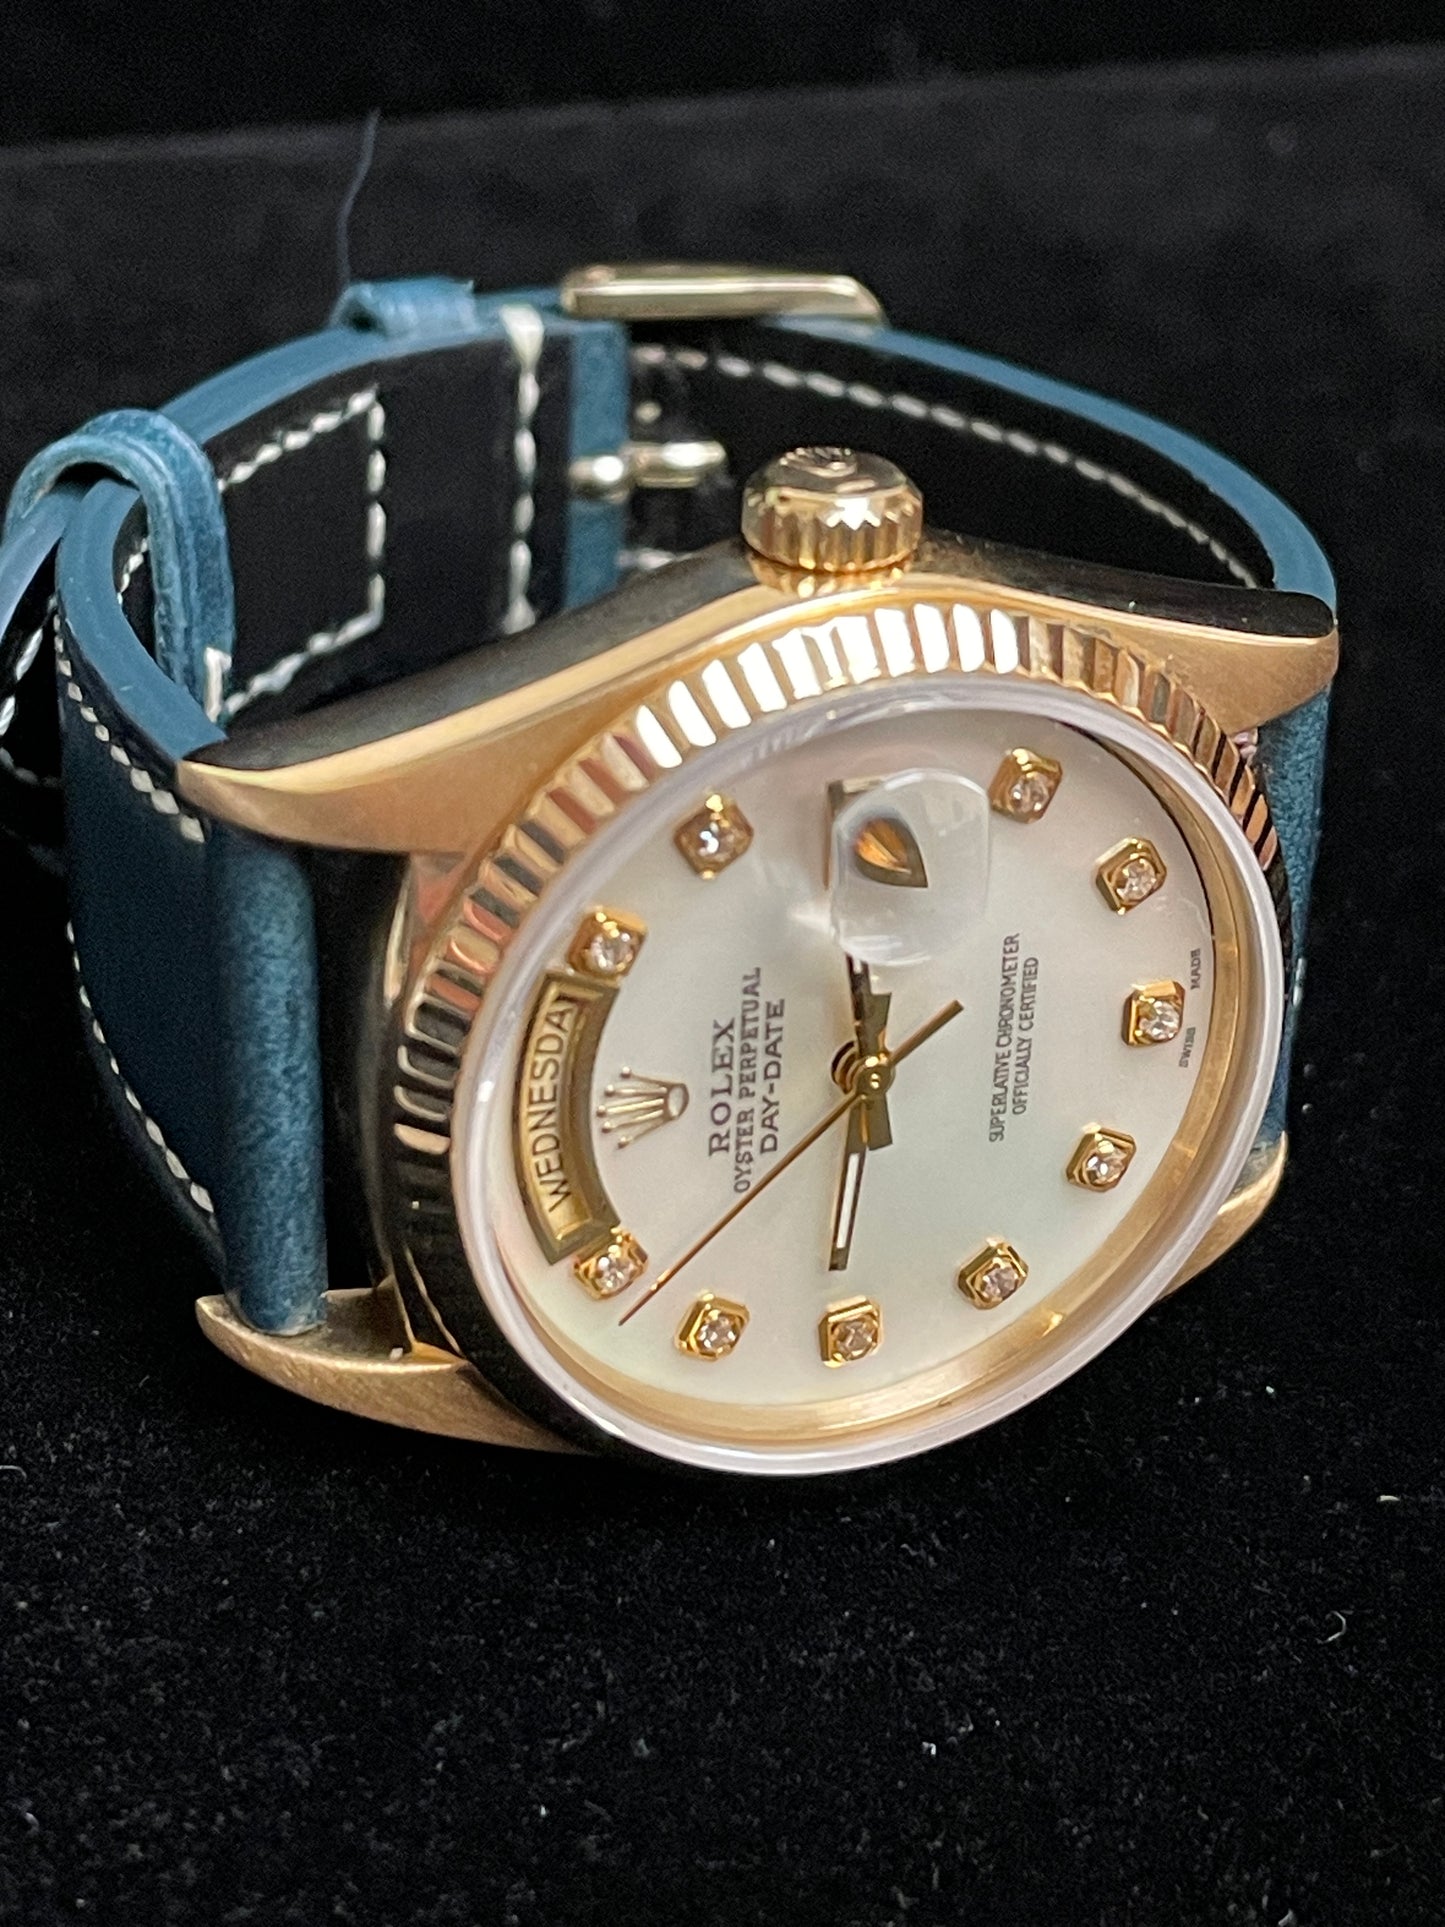 1985 Rolex Day-Date 18038 MOP Diamond Dial Blue Leather Bracelet No Papers 36mm